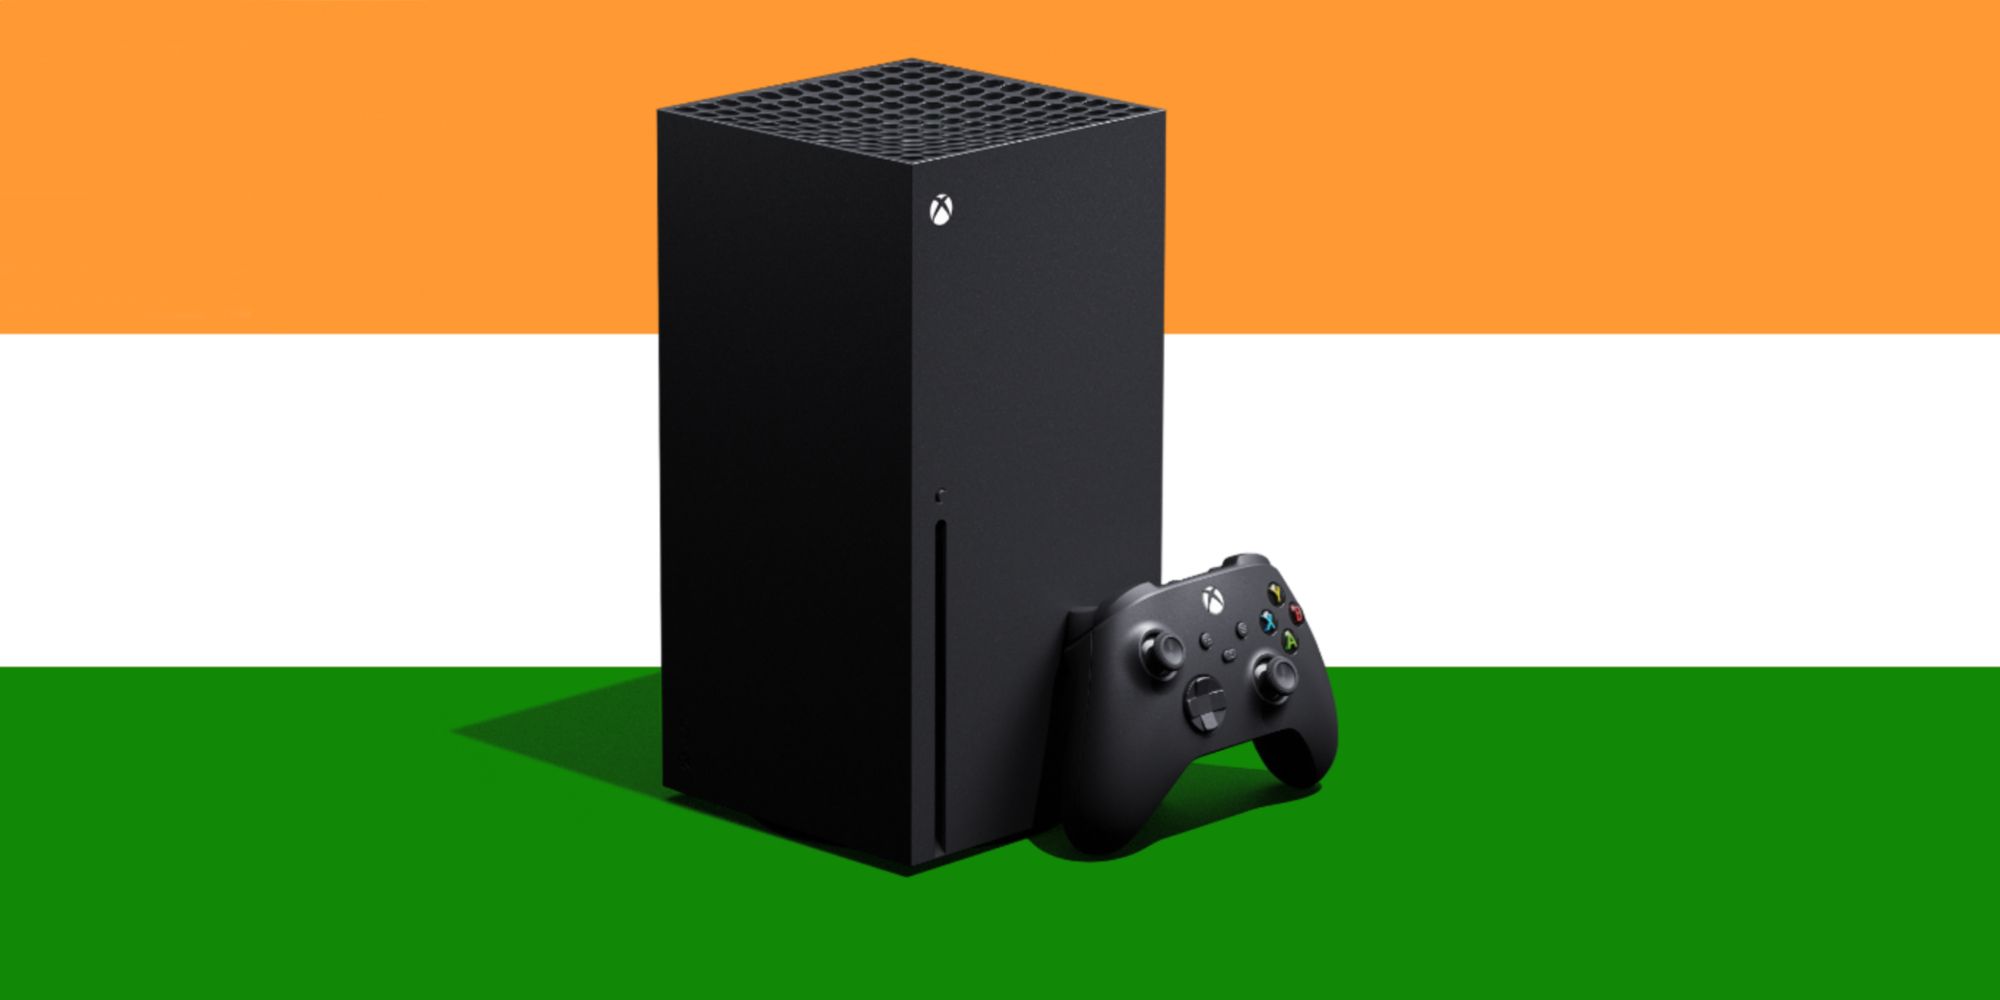 Xbox Series X with an Indian flag in the background